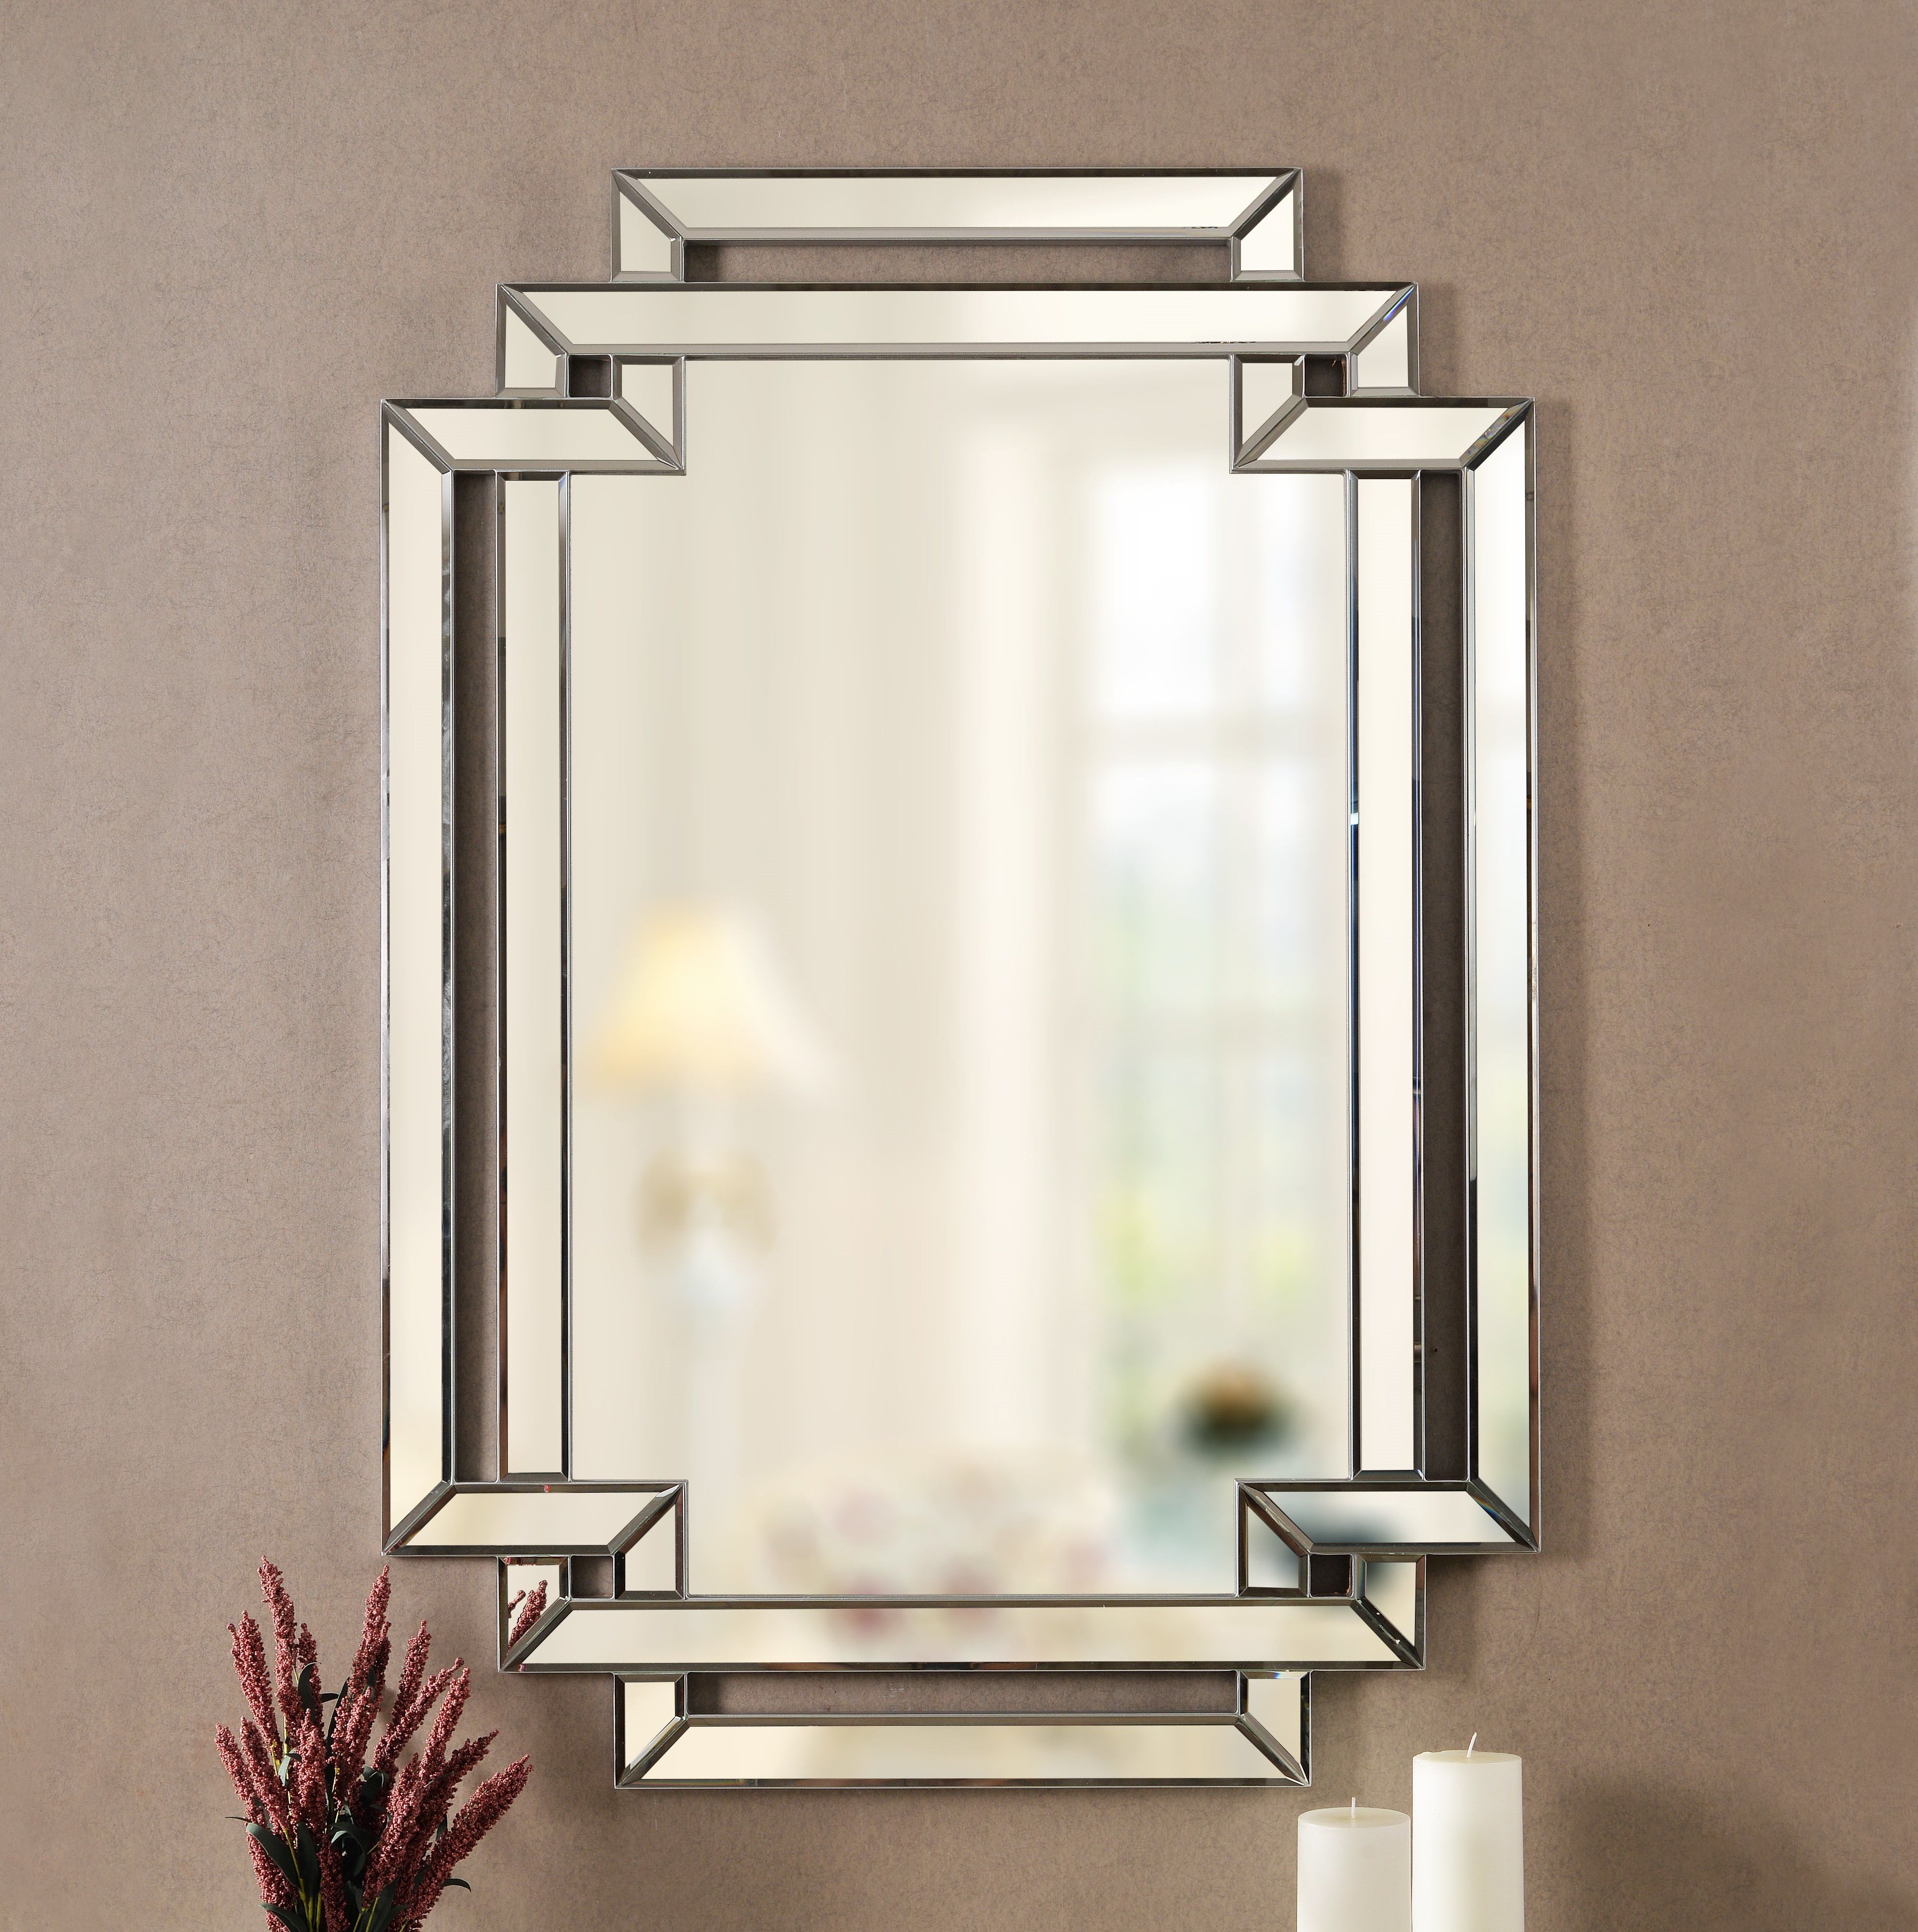 Preferred Willacoochee Traditional Beveled Accent Mirrors Intended For Seren Traditional Beveled Accent Mirror (View 5 of 20)